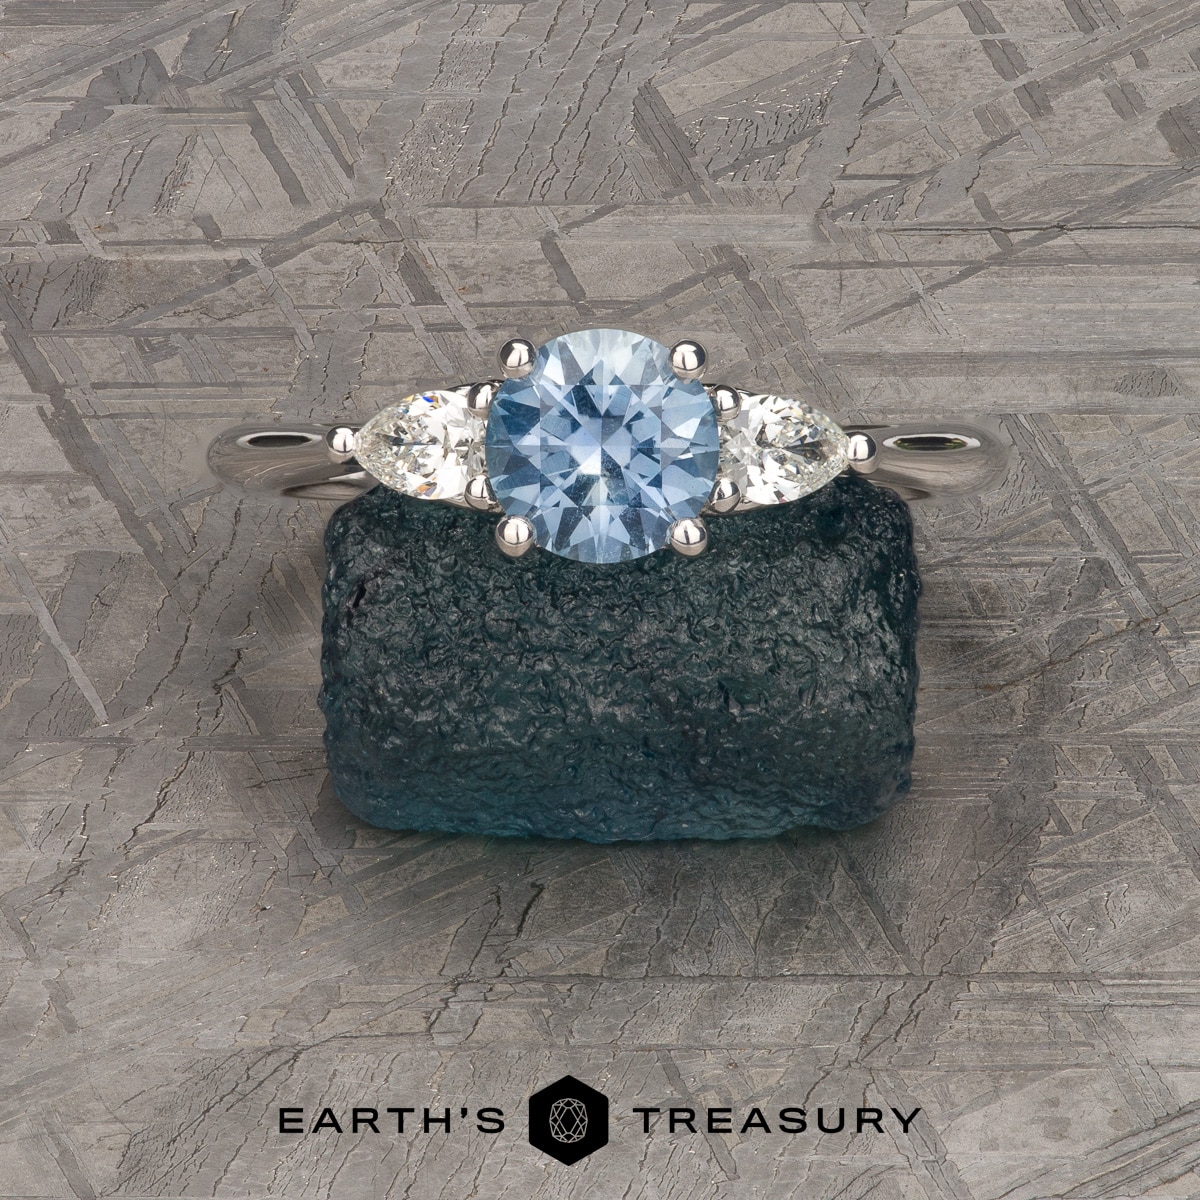 The "Multiflora" in 14k white gold with 0.78-Carat Montana Sapphire